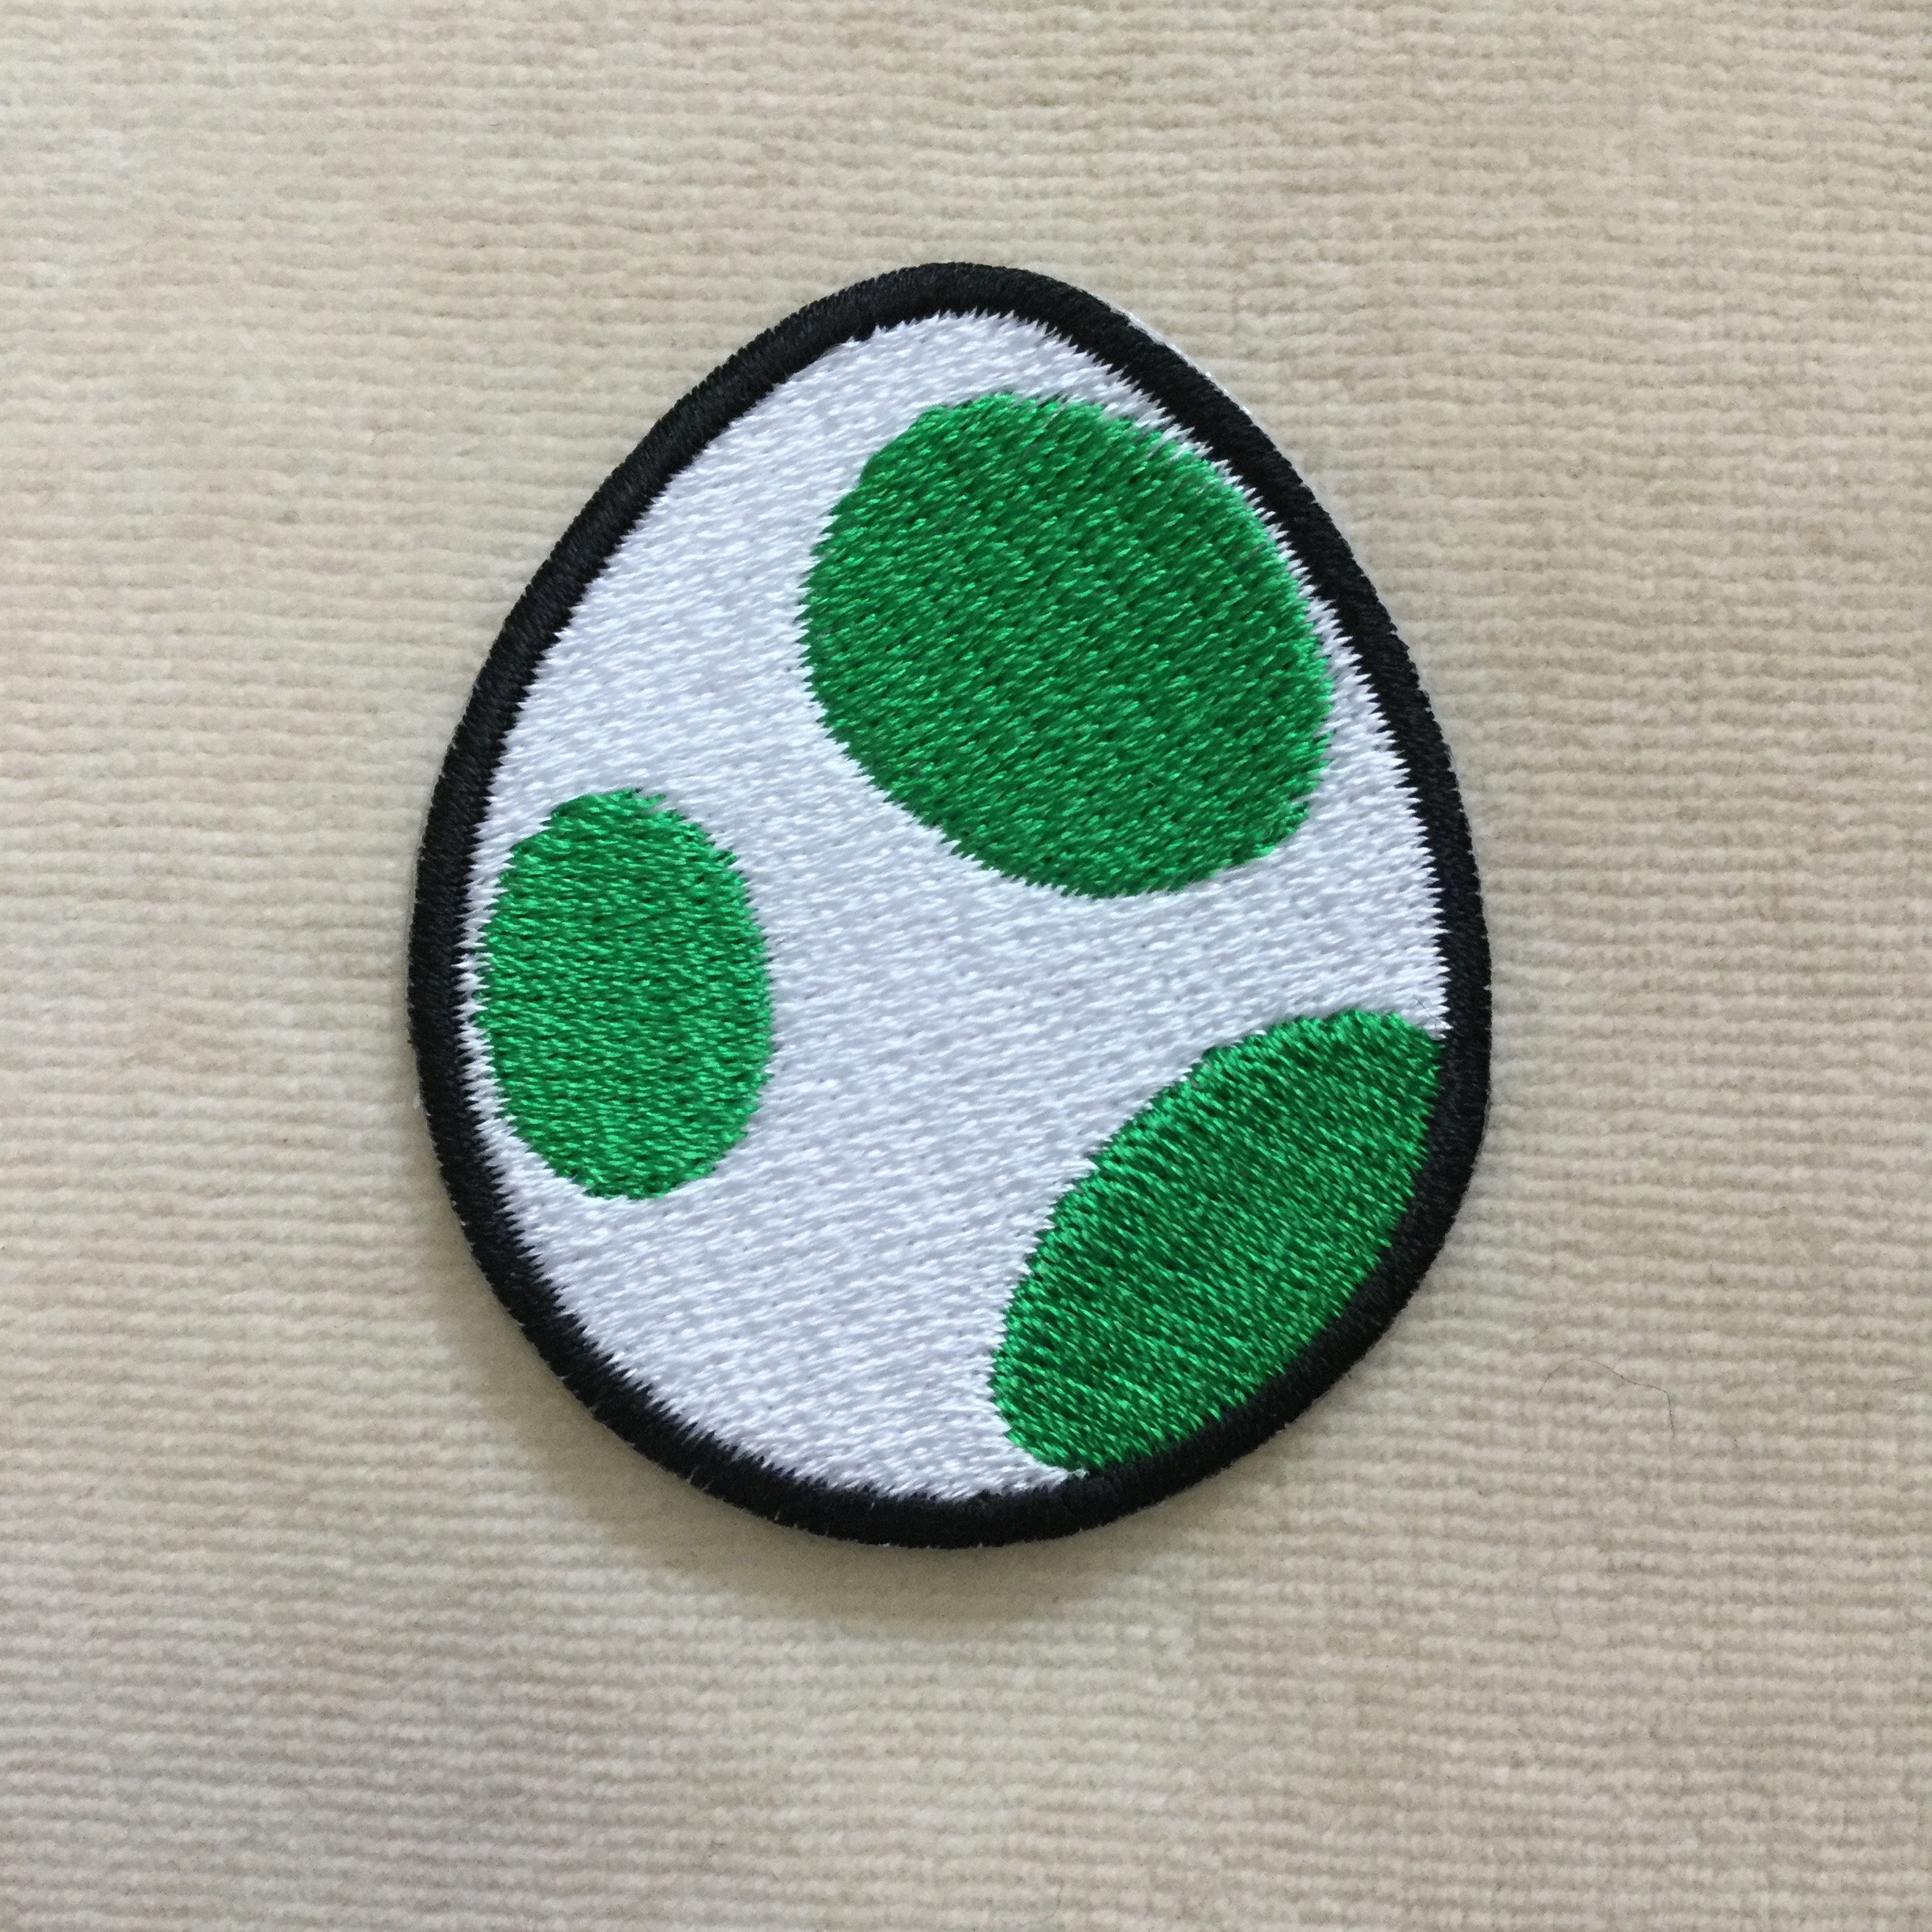 Super Mario : Embroidered Cartoon Iron Patch /iron Patch for